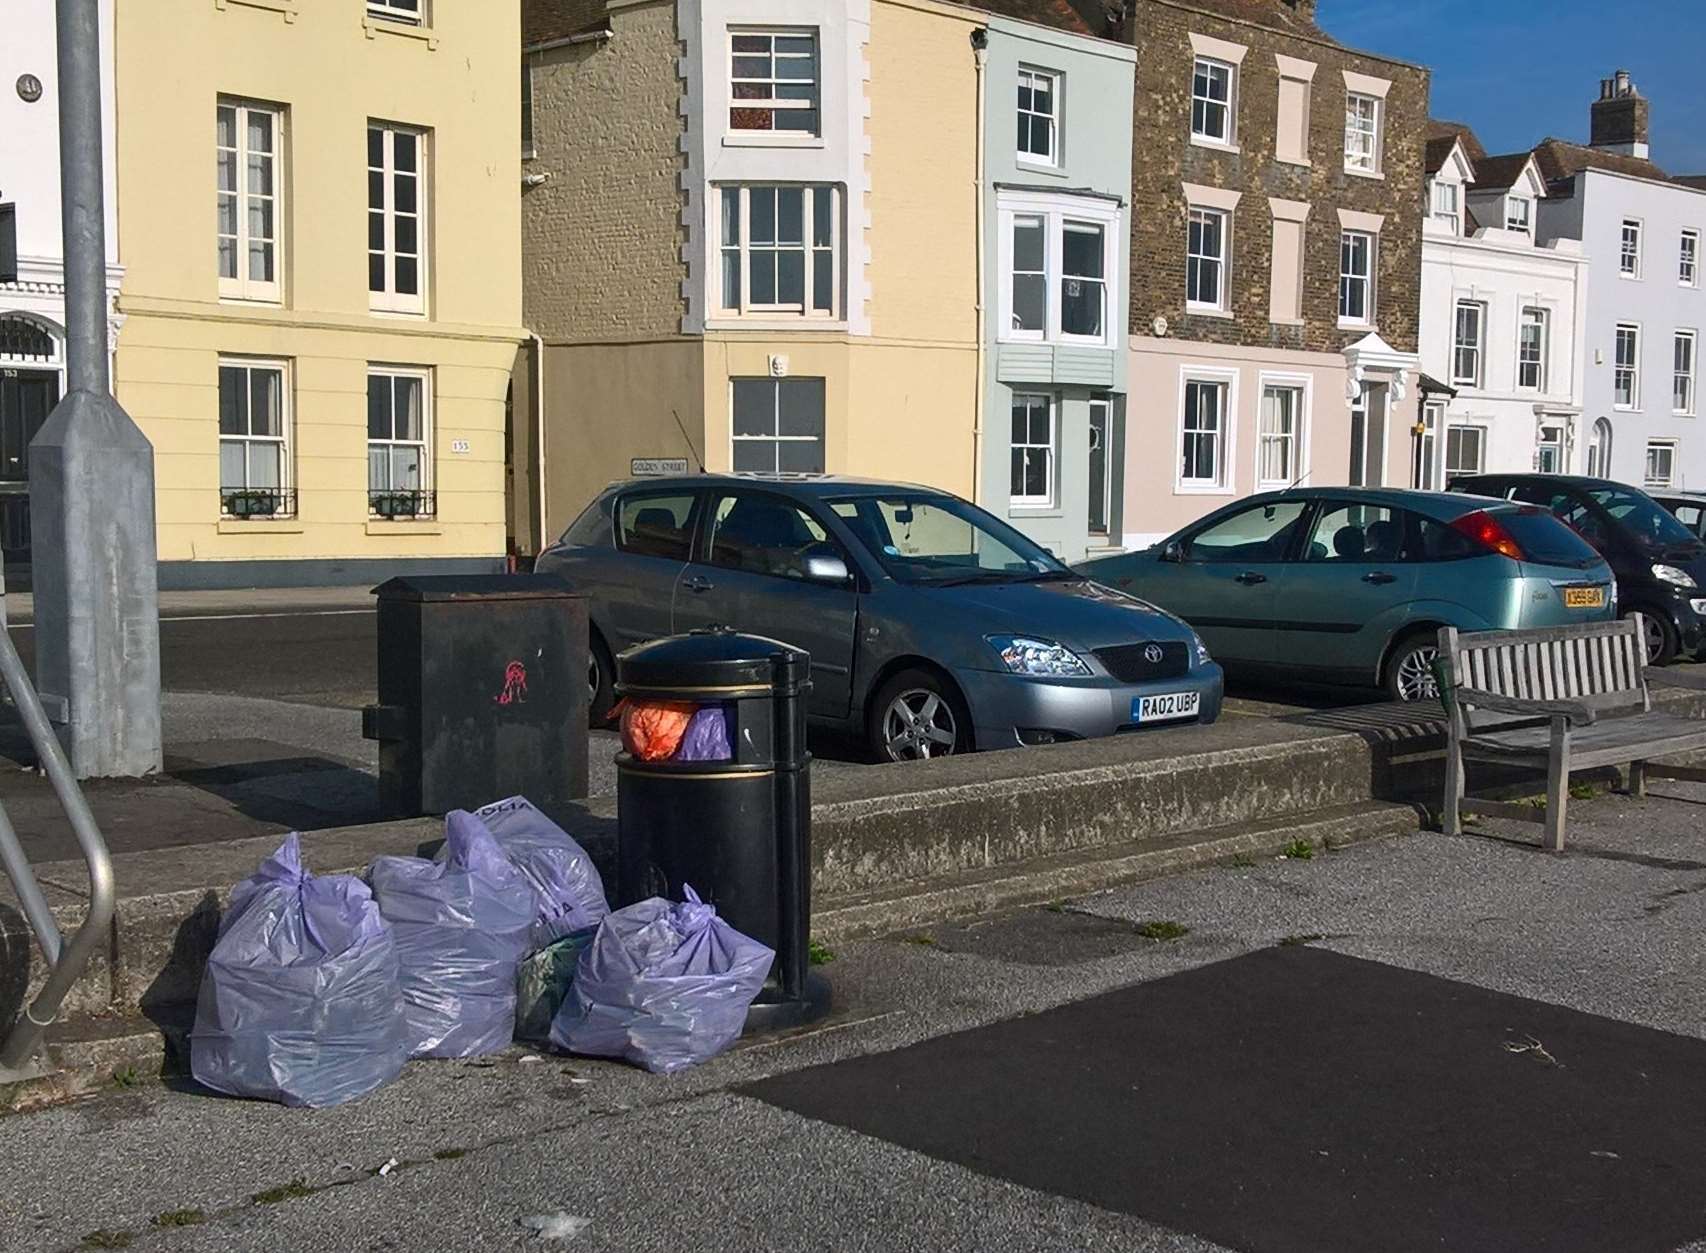 Shots of household rubbish left on Deal promenade